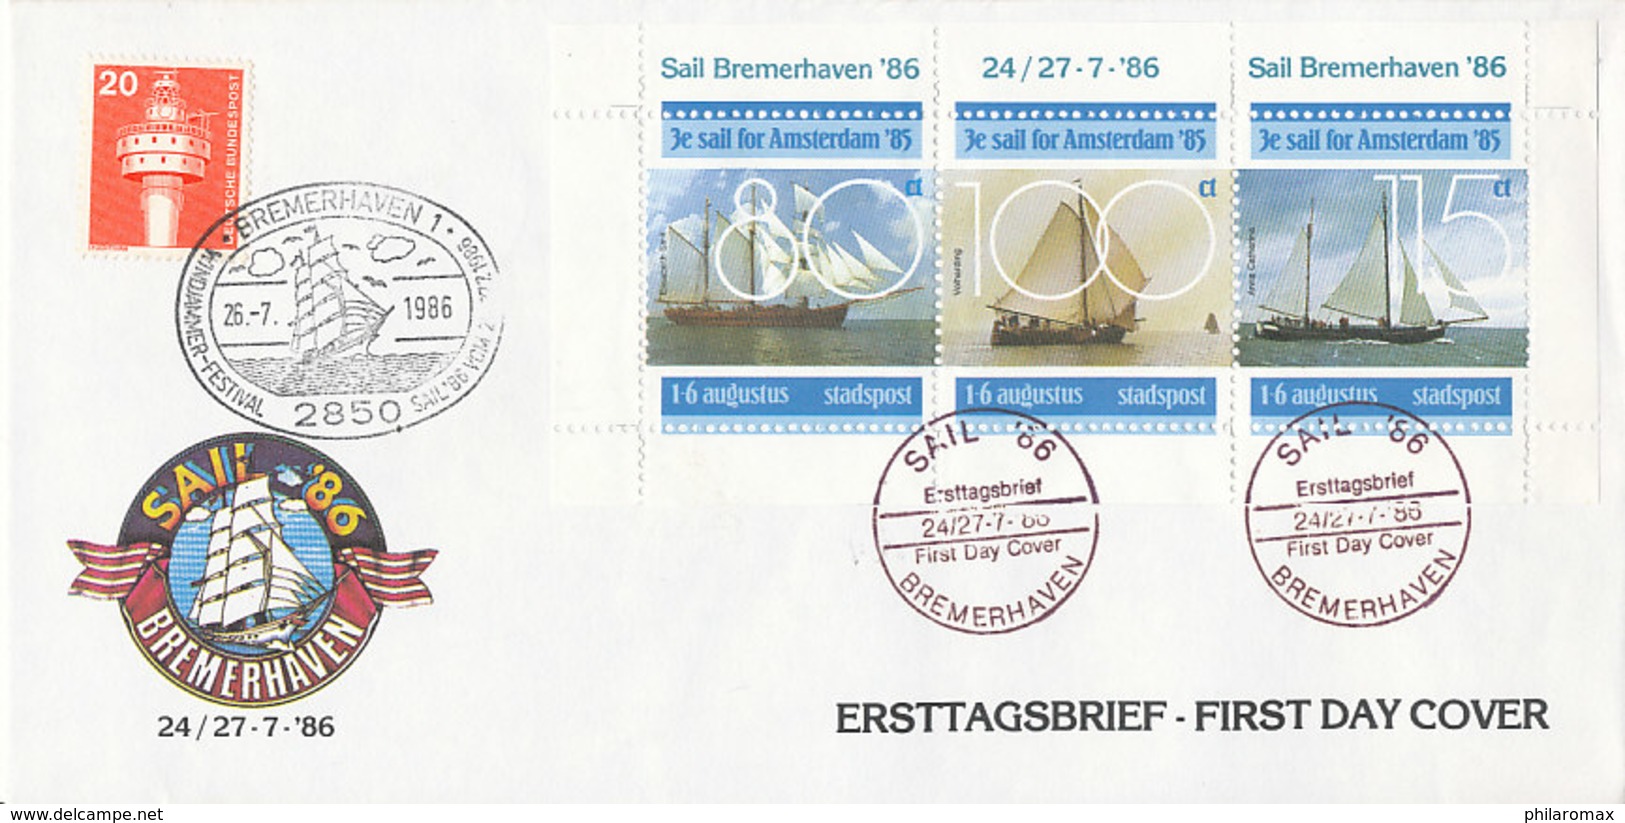 DC-2243 - 1986 NETHERLANDS FDC - STADSPOST - LOCAL MAIL - SAIL BREMERHAVEN ON TAB - BLOCK LARGE COVER - FDC